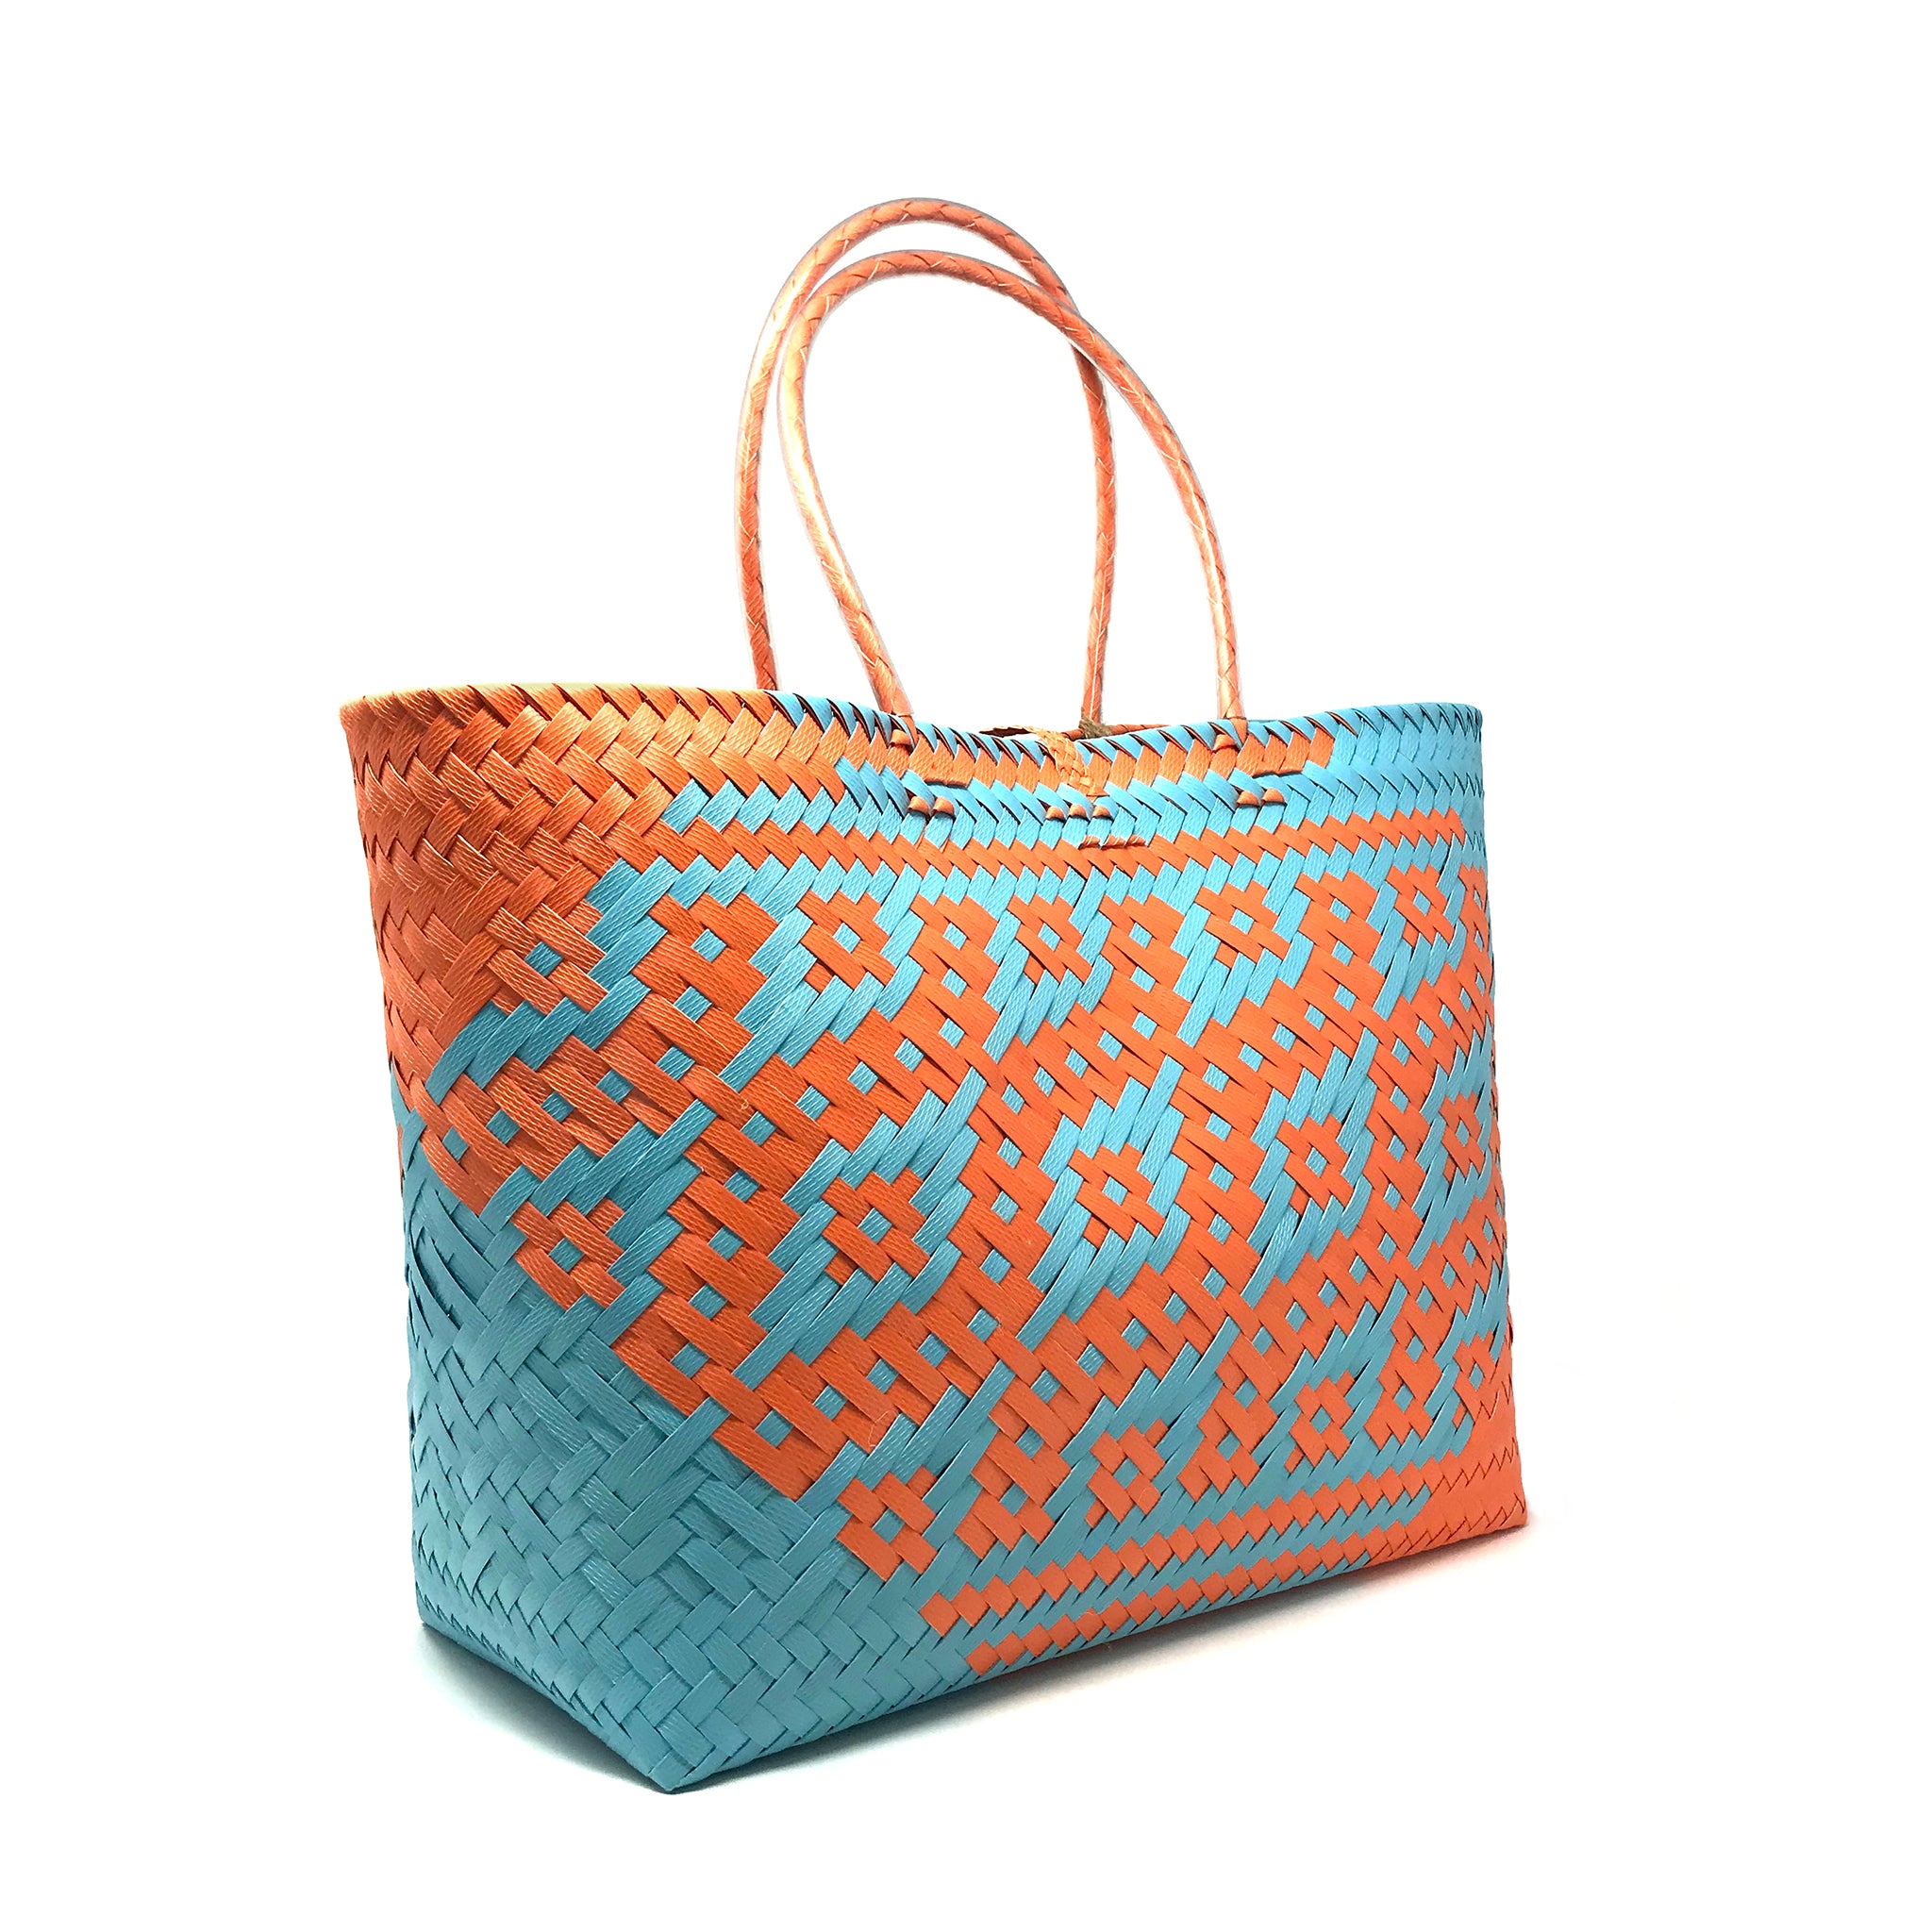 Blue and orange large size tote bag at a 45-degree angle.